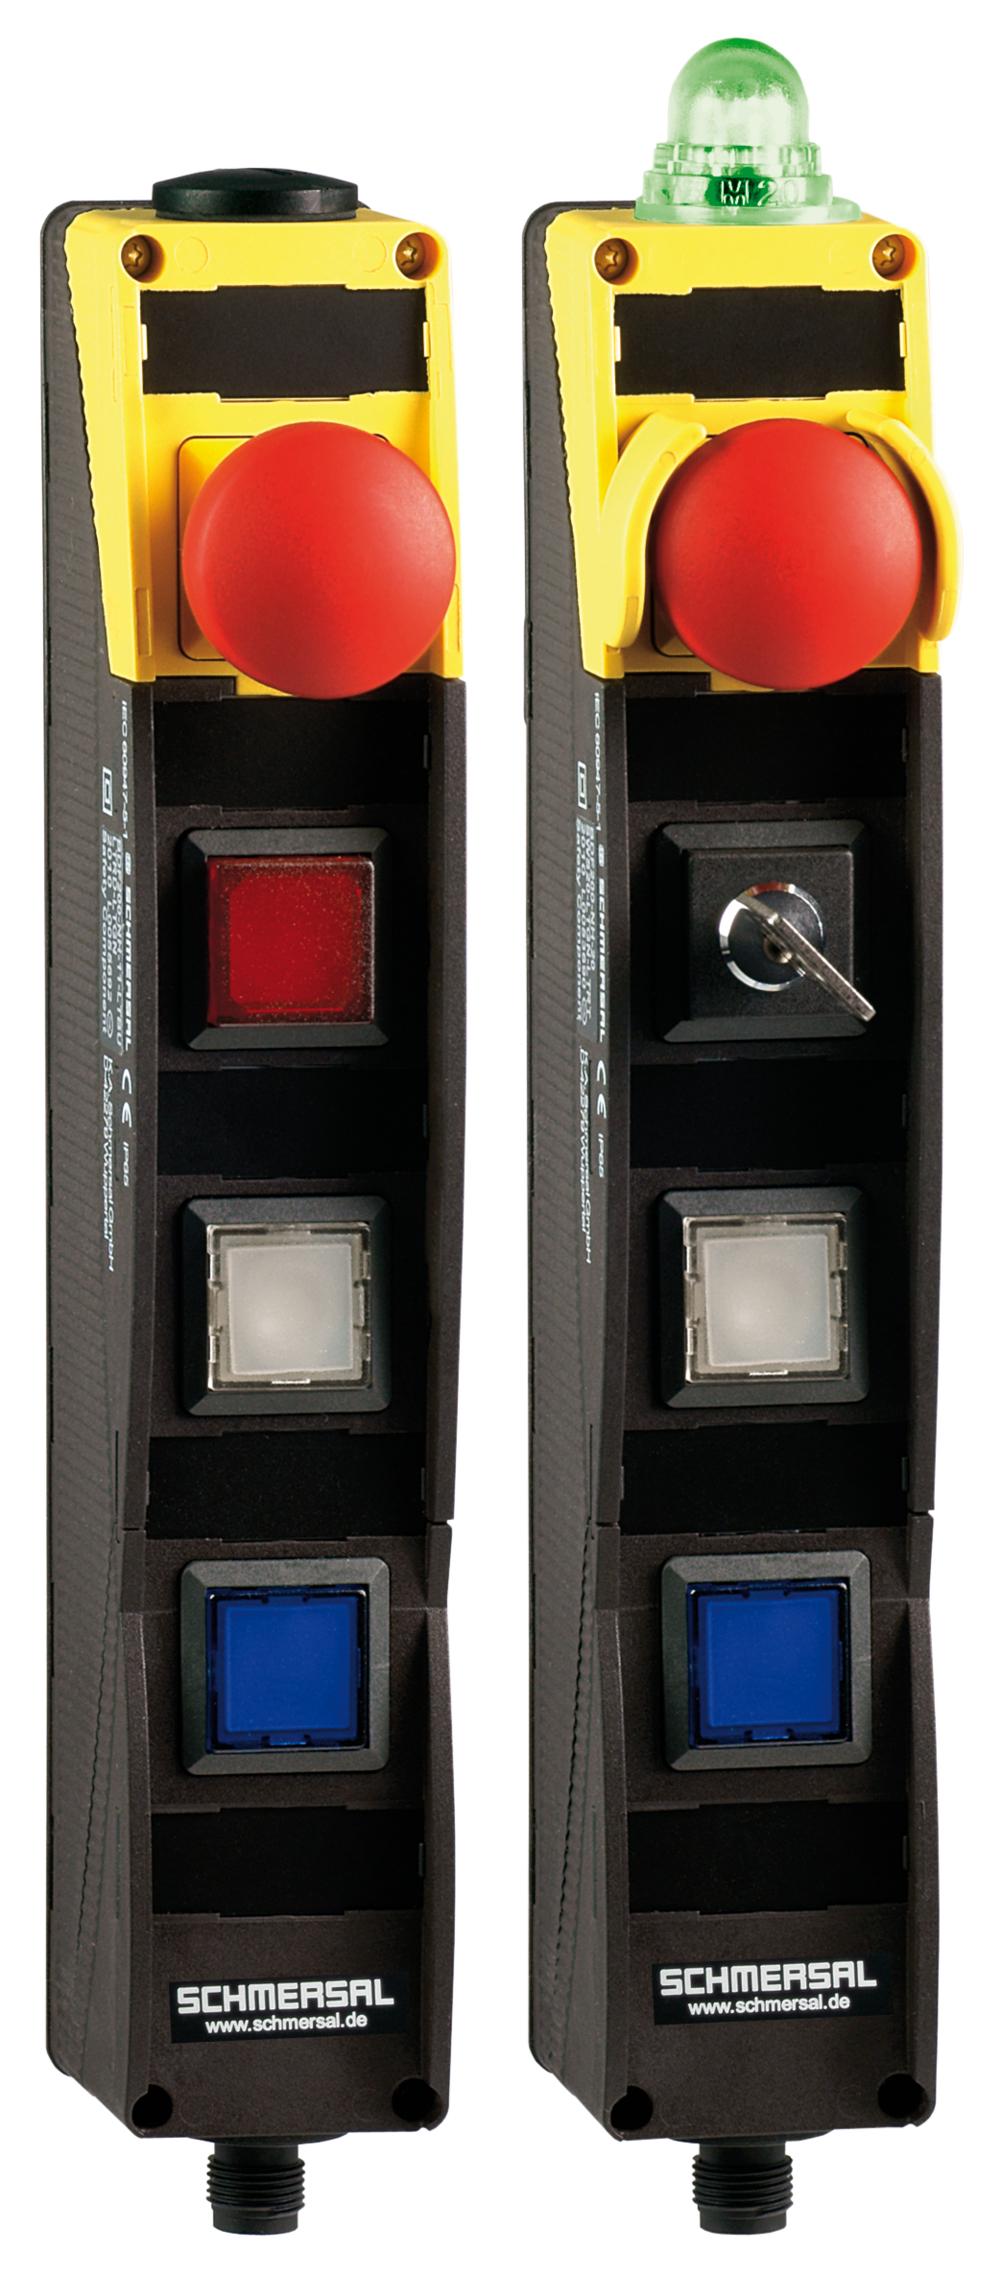 Schmersal BDF200-ST1-AS-NH-WS20-LTWH-LTGN AS interface safety at work; Safety switchgear; Integrated AS-Interface; with connector plug M12 bottom; Pos 1: E-STOP; Pos 2: Selector switch, 2 positions; Pos 3: WHITE illuminated pushbutton; Pos 4: GREEN illuminated pushbutton; slender shock-proof ther